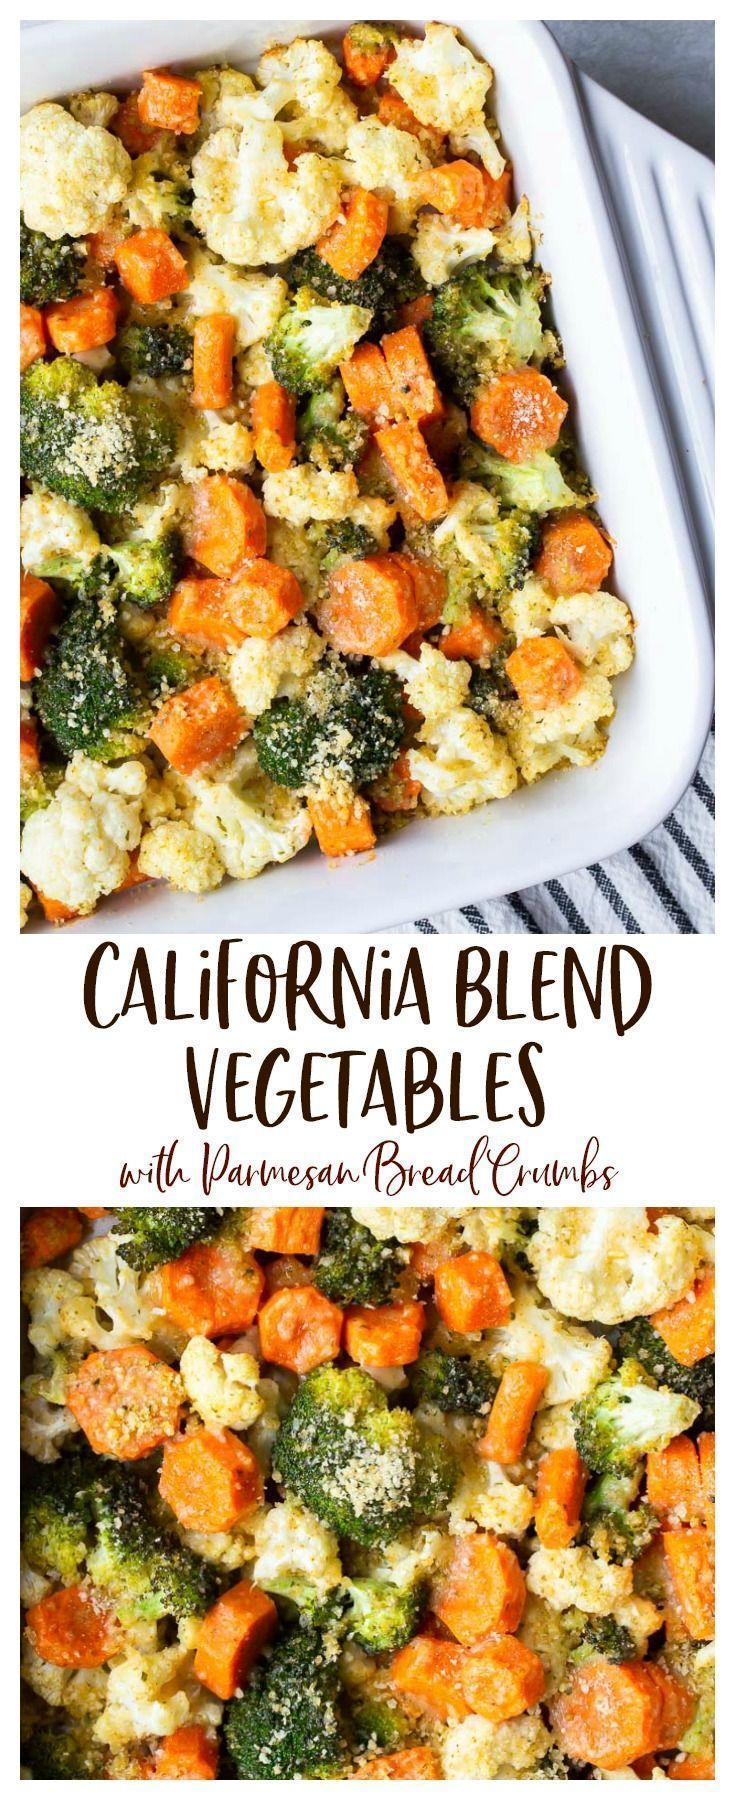 California Blend Vegetables with Parmesan Bread Crumbs - California Blend Vegetables with Parmesan Bread Crumbs -   19 easy healthy thanksgiving sides ideas